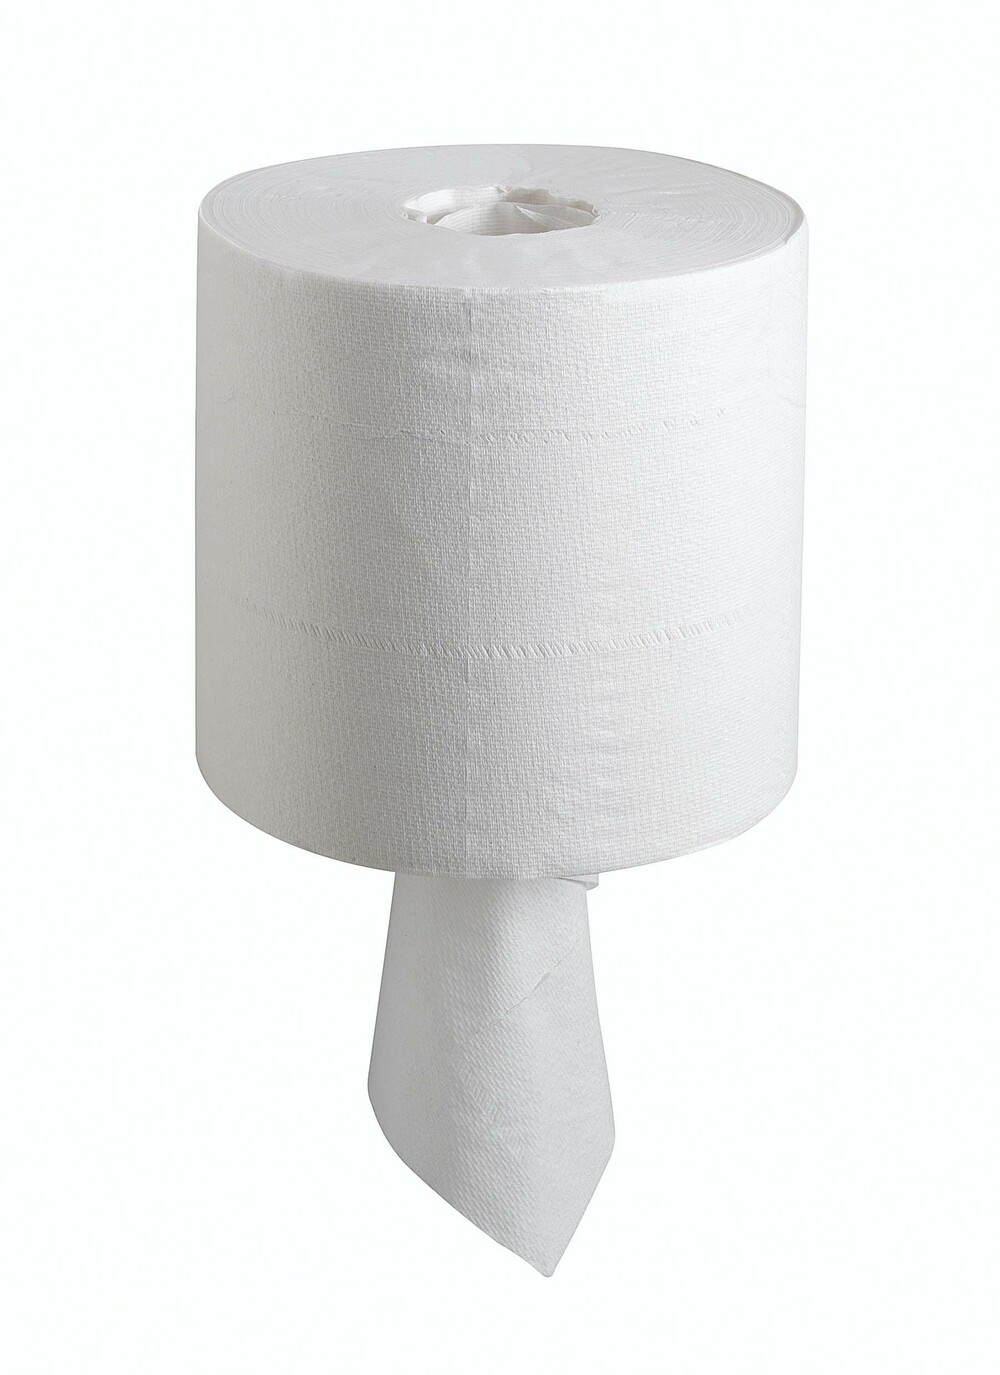 WypAll® Food & Hygiene Wiping Paper L10 Centrefeed for Roll Control™ Dispenser 7490 - 6 rolls x 630 sheets, 1 ply, white - 7490